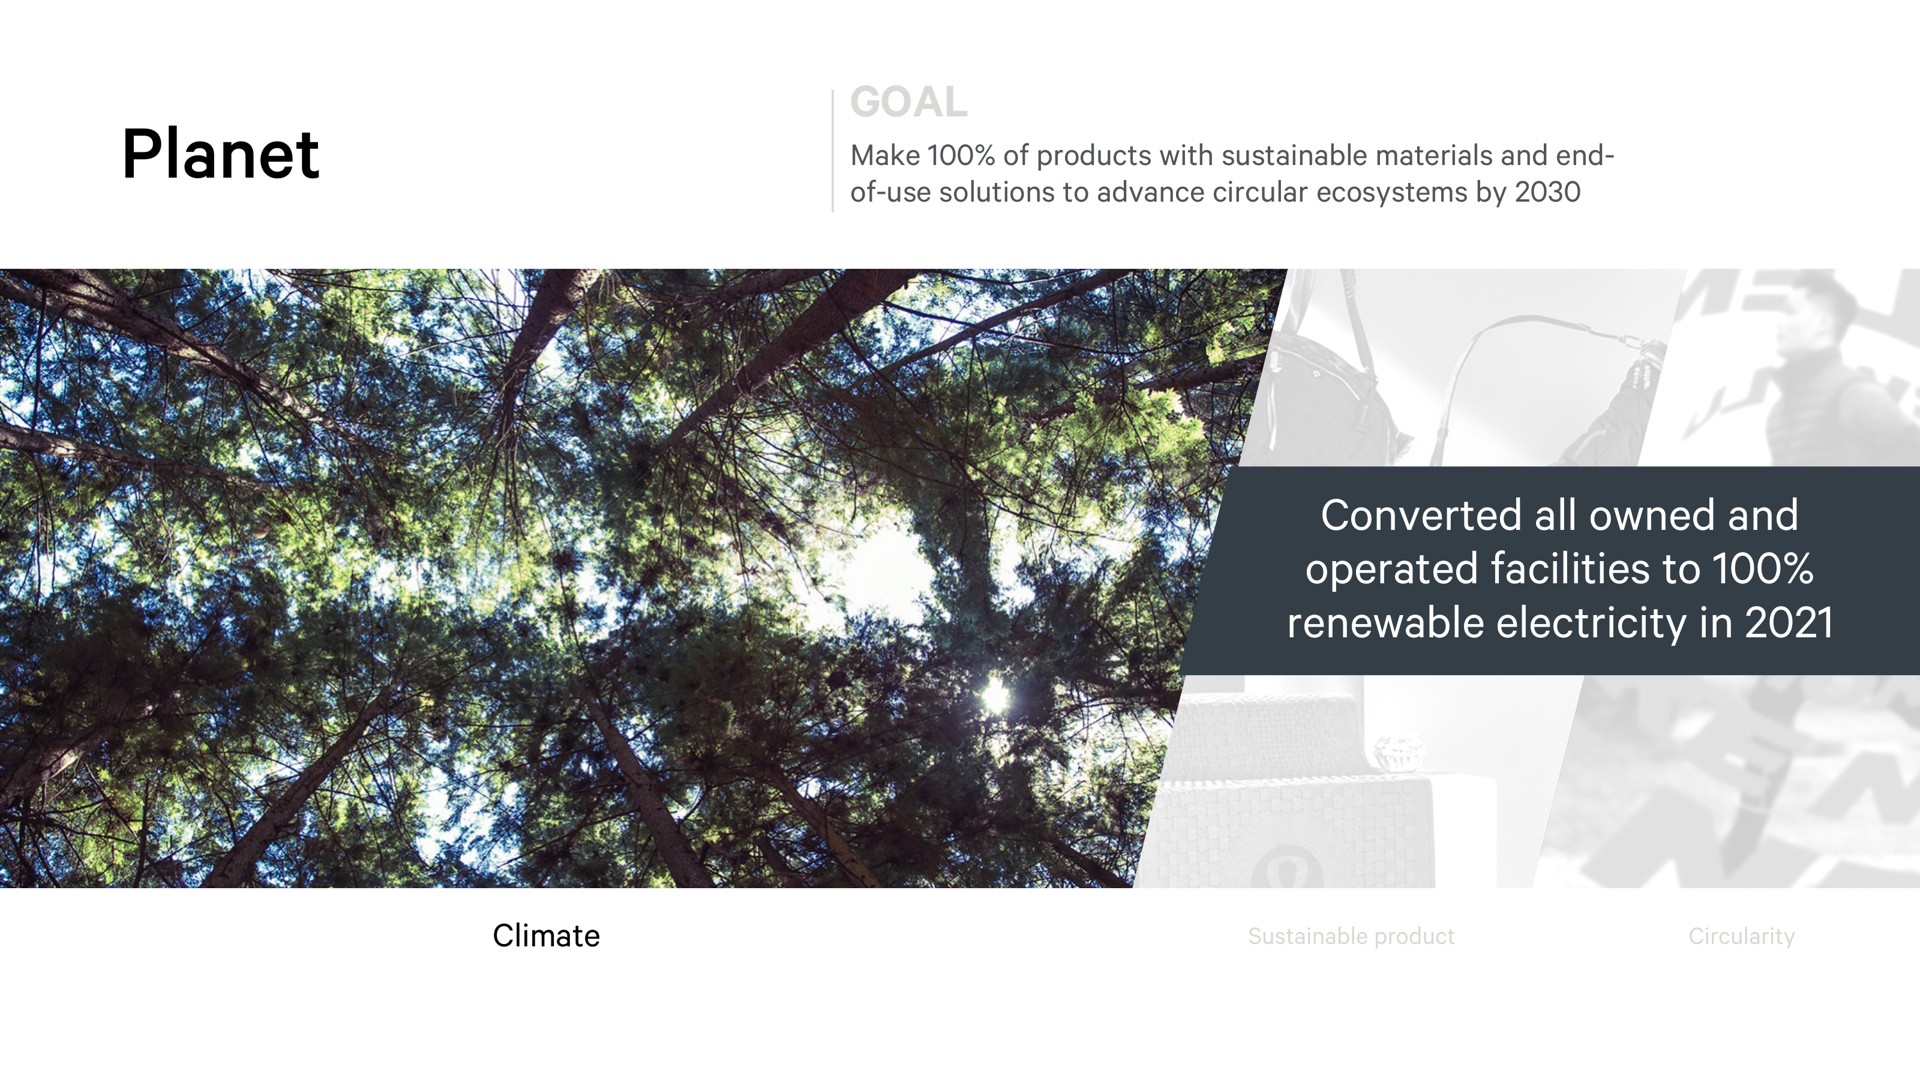 planet goal converted all owned and operated facilities to renewable electricity in | Lululemon